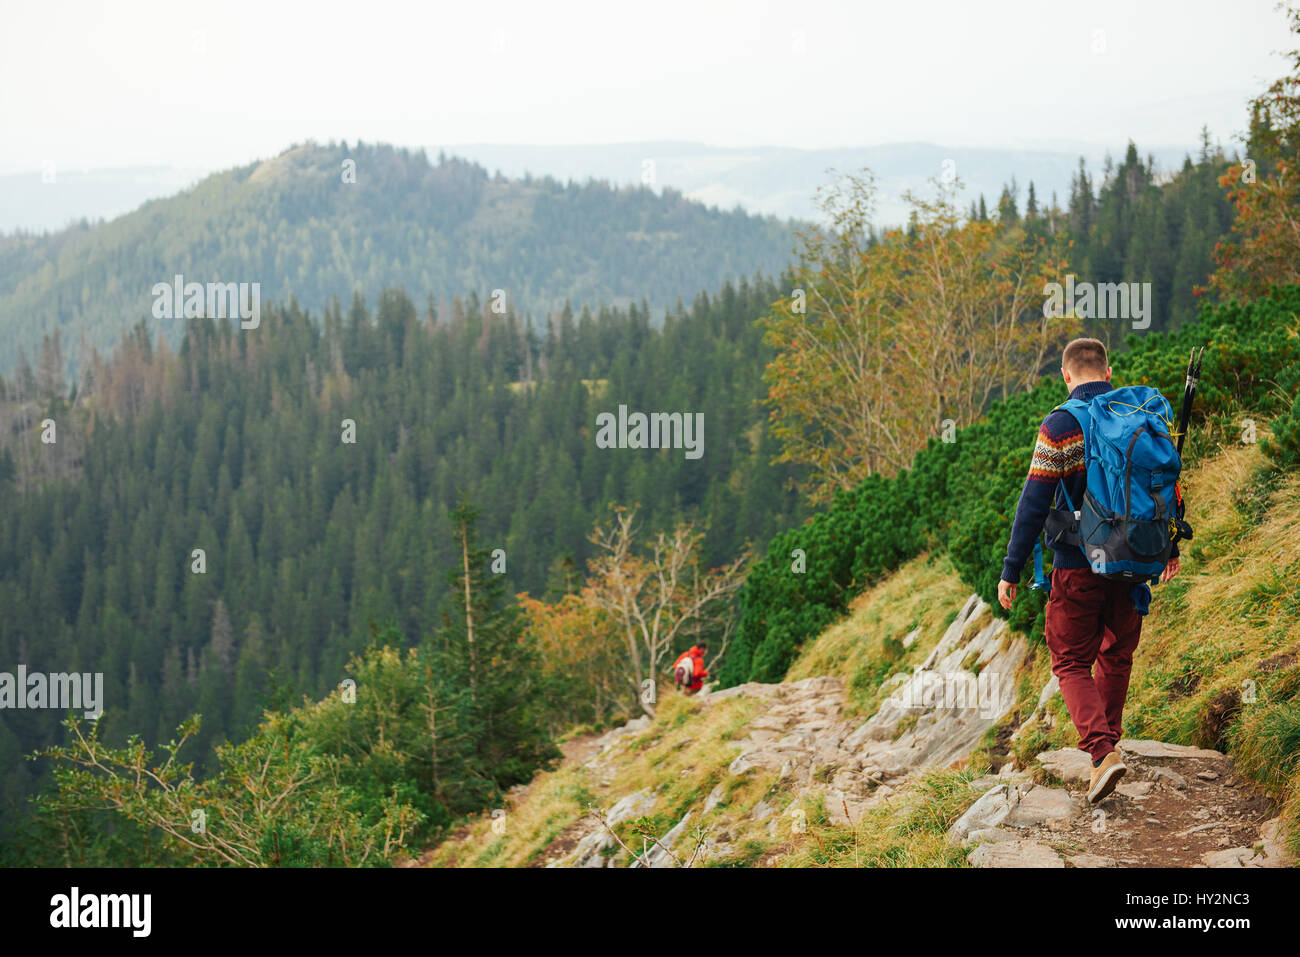 Hikers making their way down a rocky trail in the mountains Stock Photo